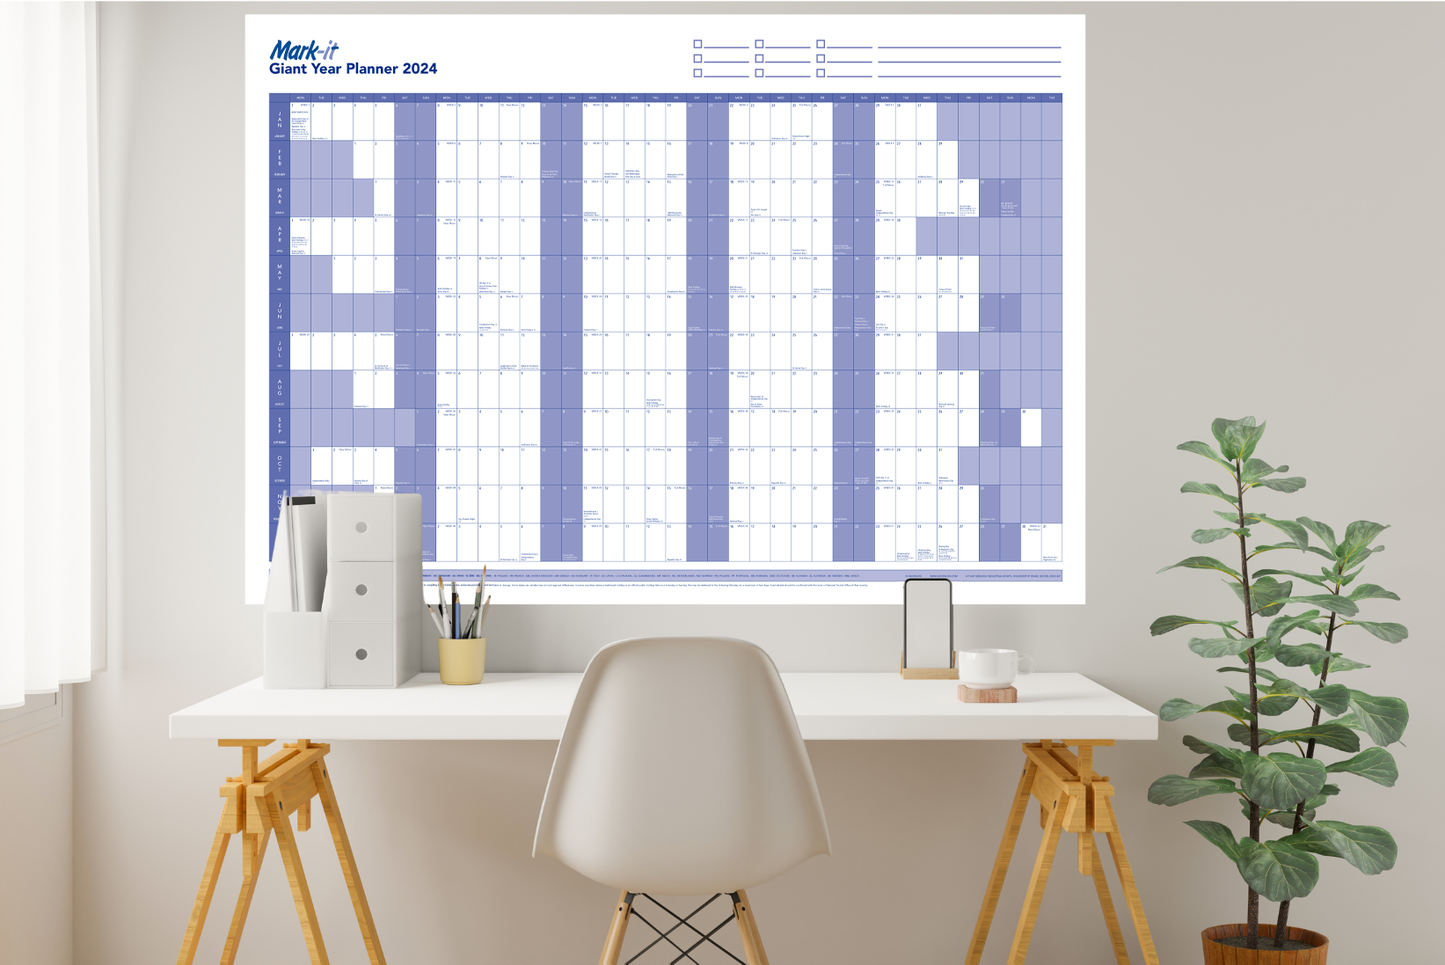 GIANT 2024 YEARLY WALL PLANNER - MARK IT